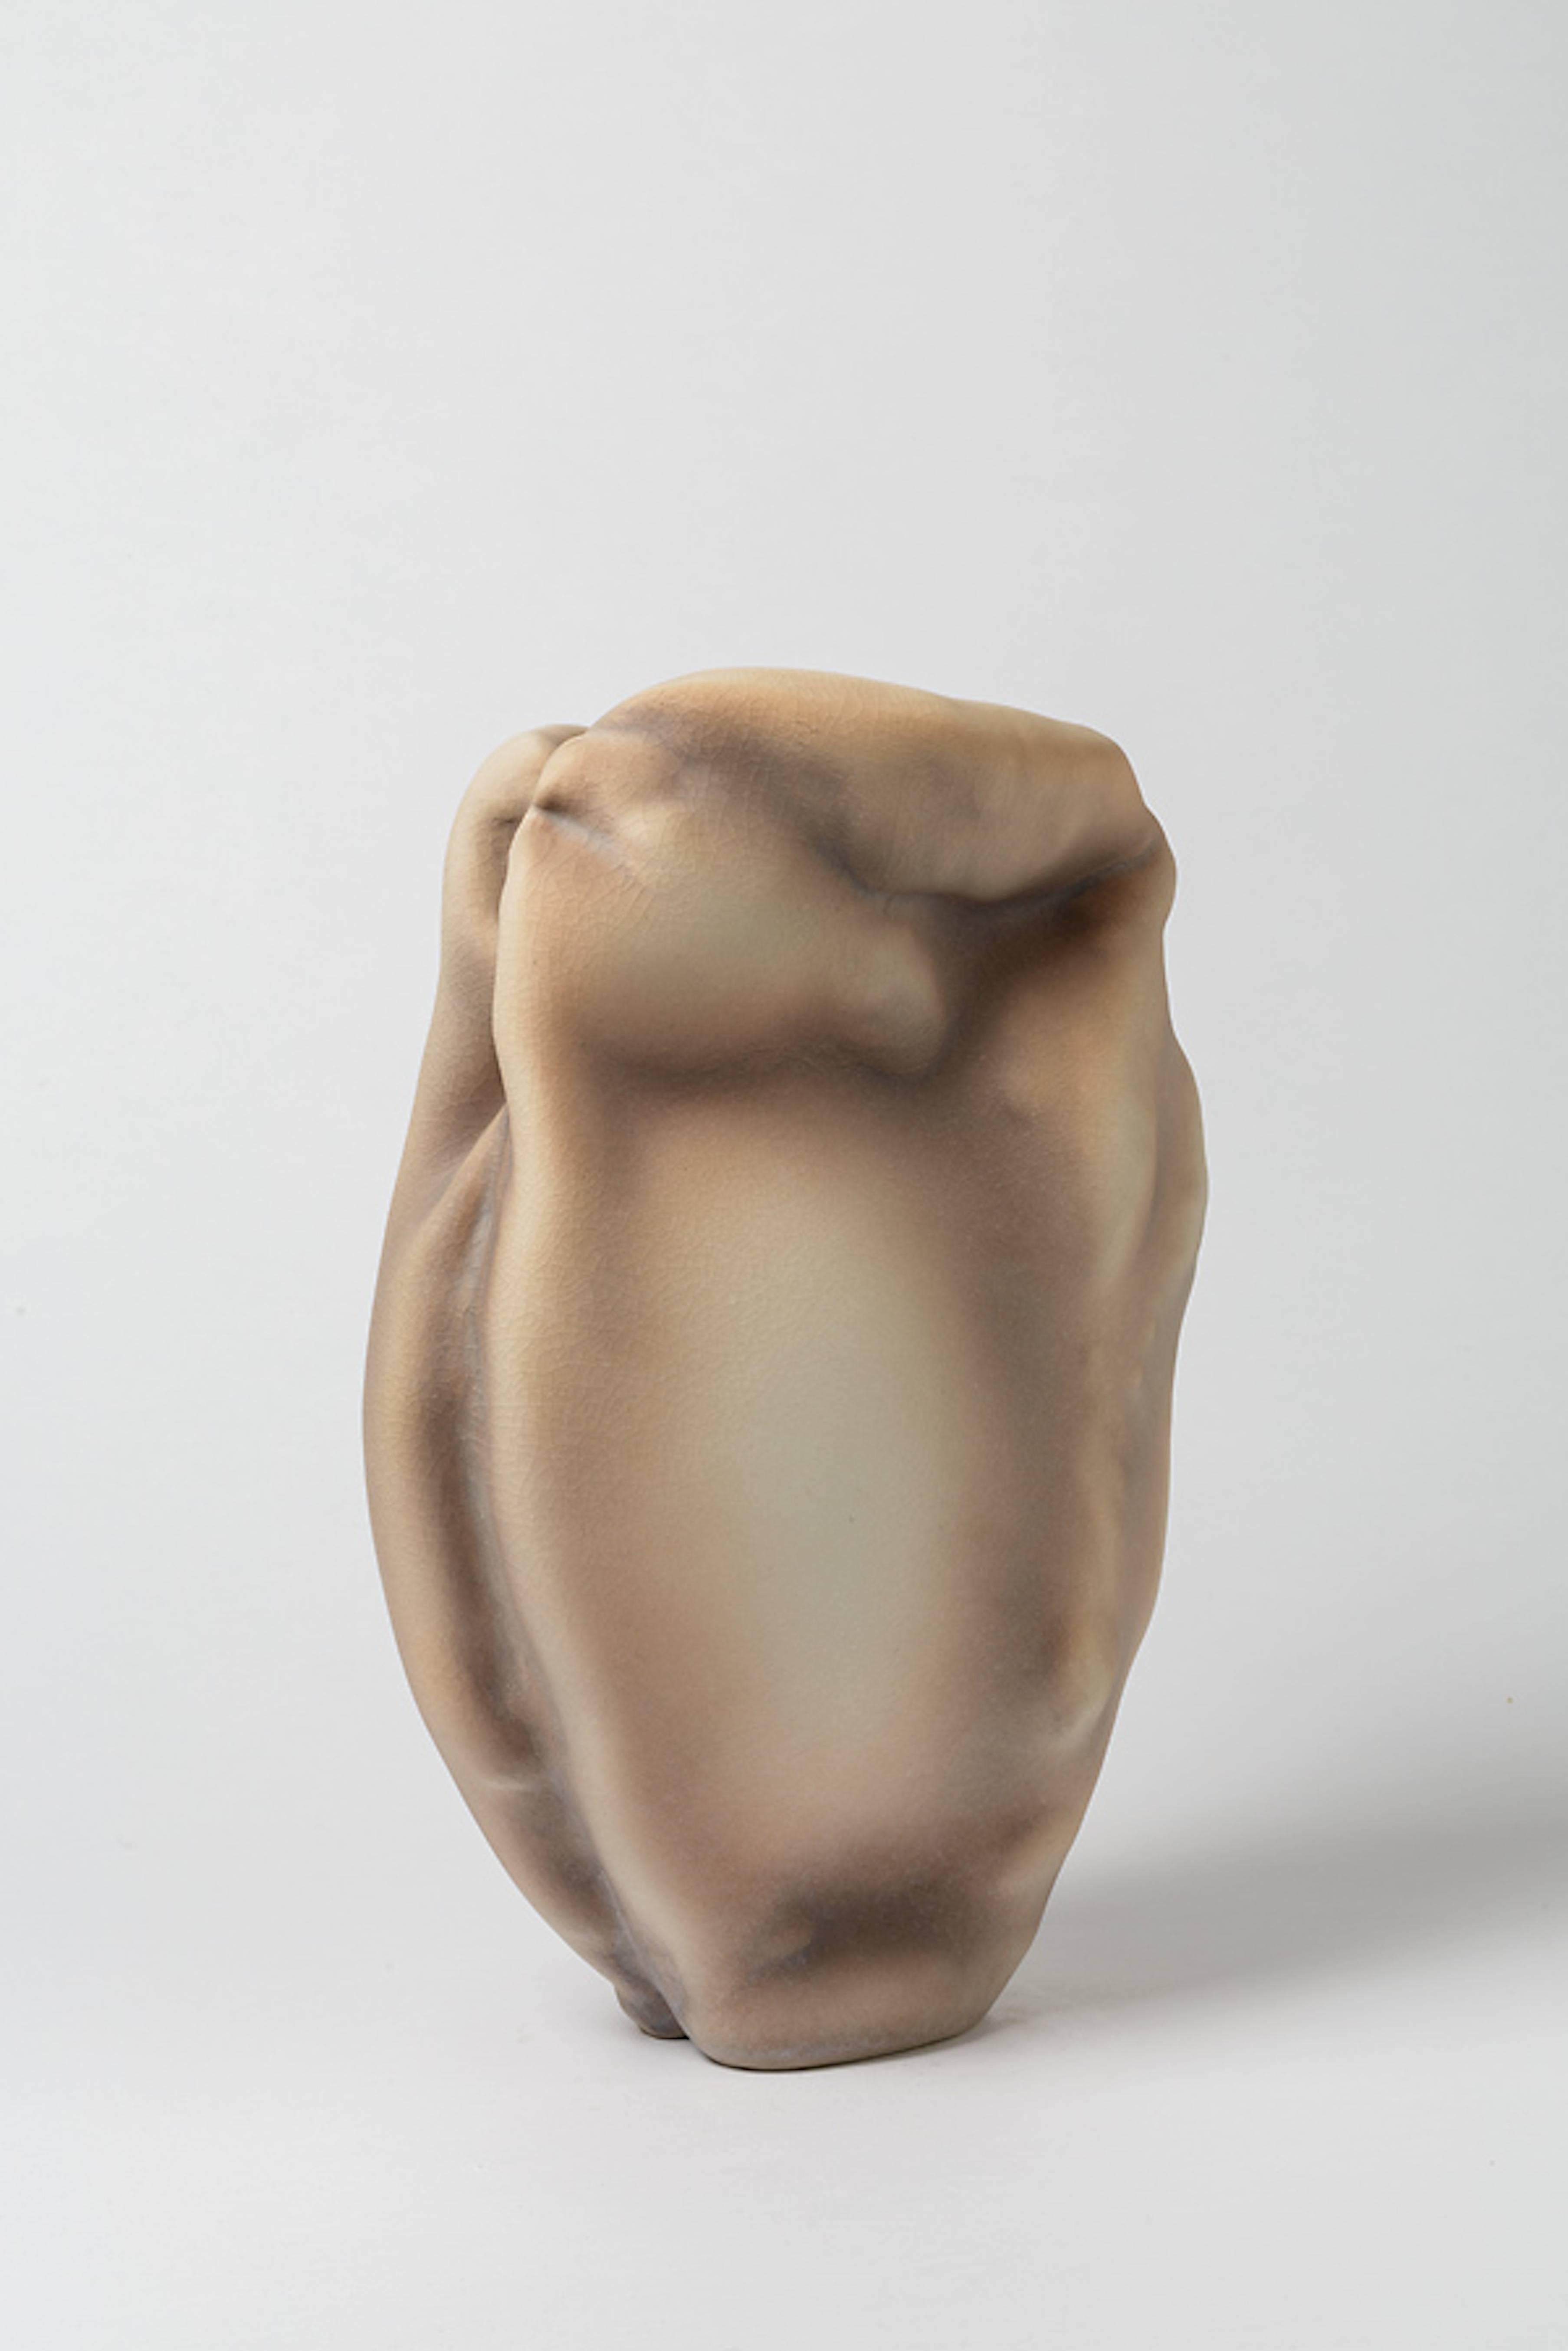 Molded Porcelain Sculpture by Wayne Fischer (French-American), circa 2016